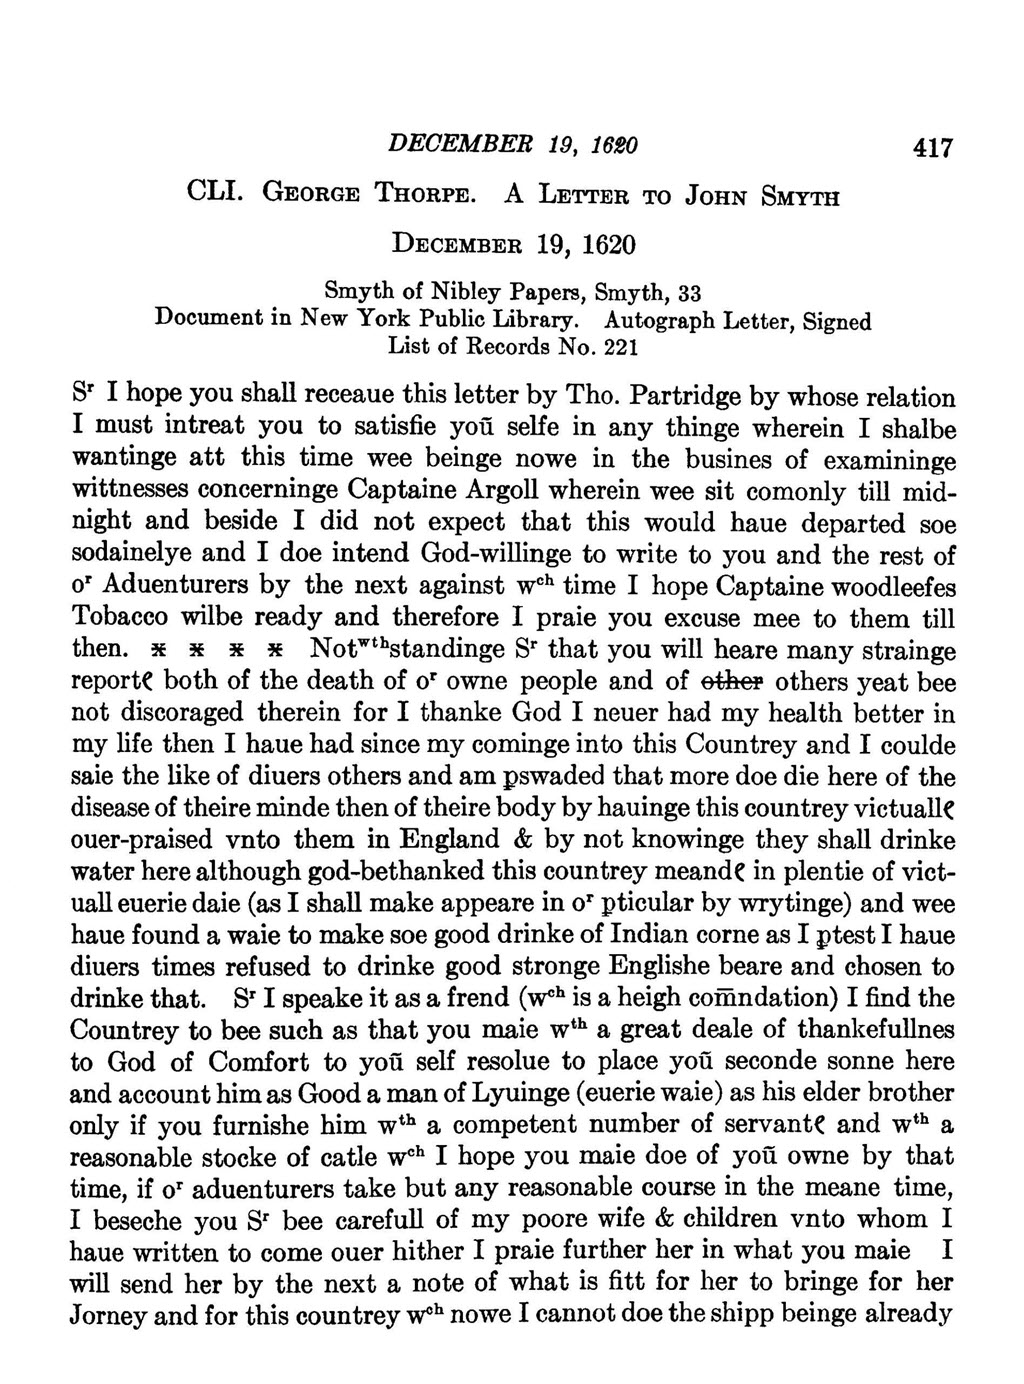 George Thorpe letter to John Smyth, Dated Dec. 19, 1620 Page 1